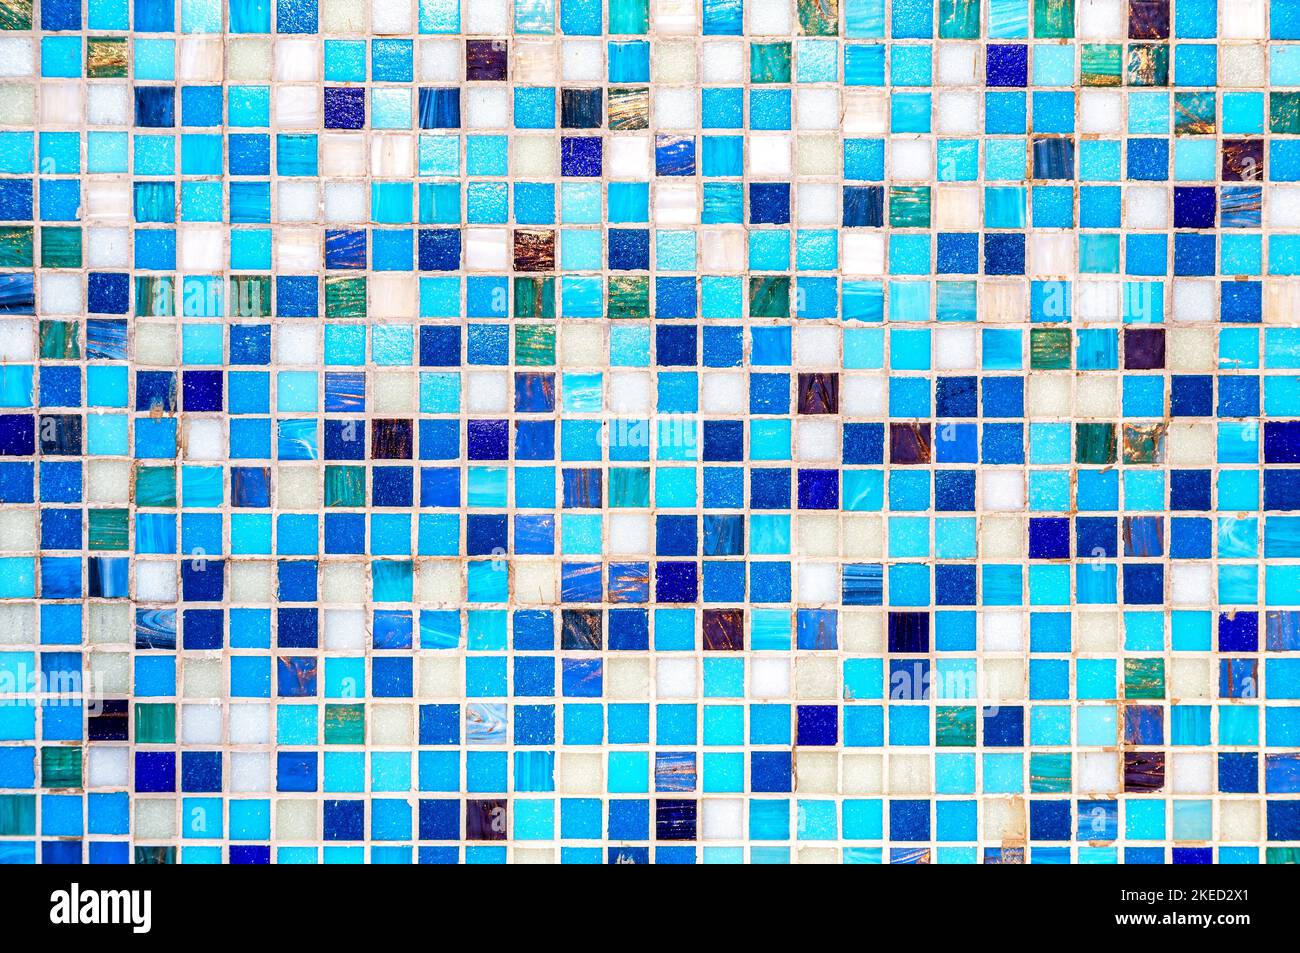 Abstract background from wall mosaic tiles in blue and white Stock Photo